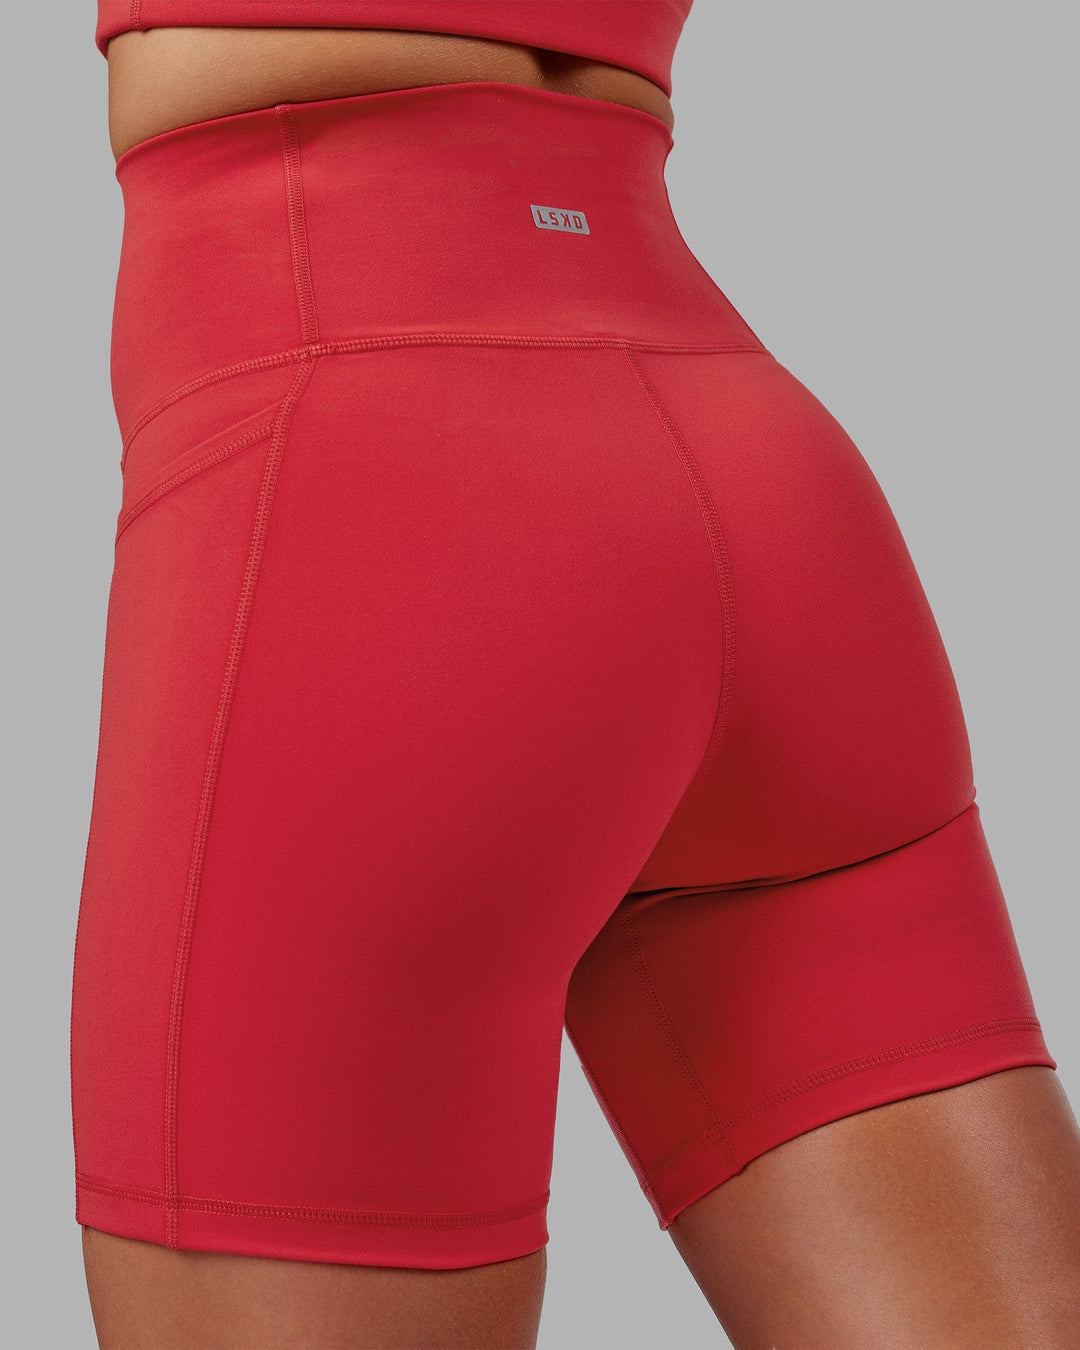 Woman wearing Fusion Mid Short Tight - Scarlet